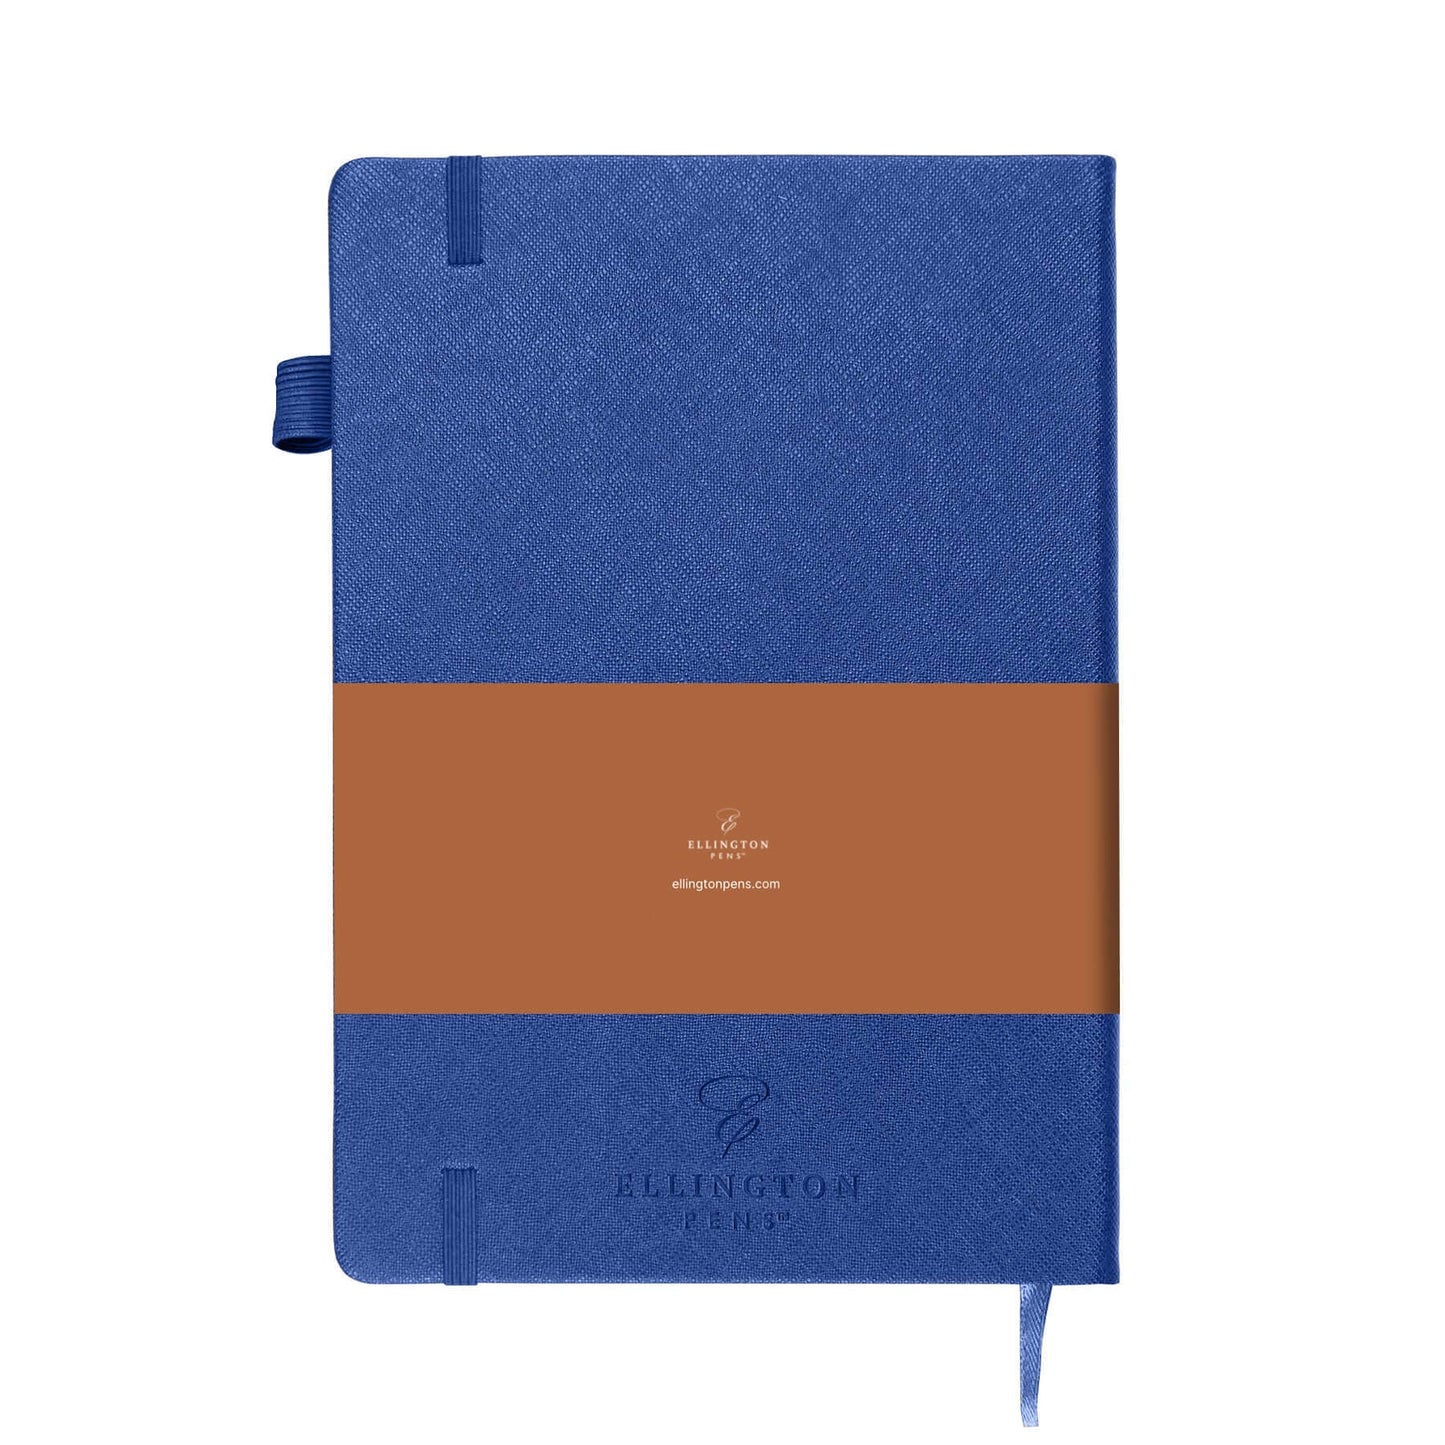 The Nautilus Journal and Pen Gift Set